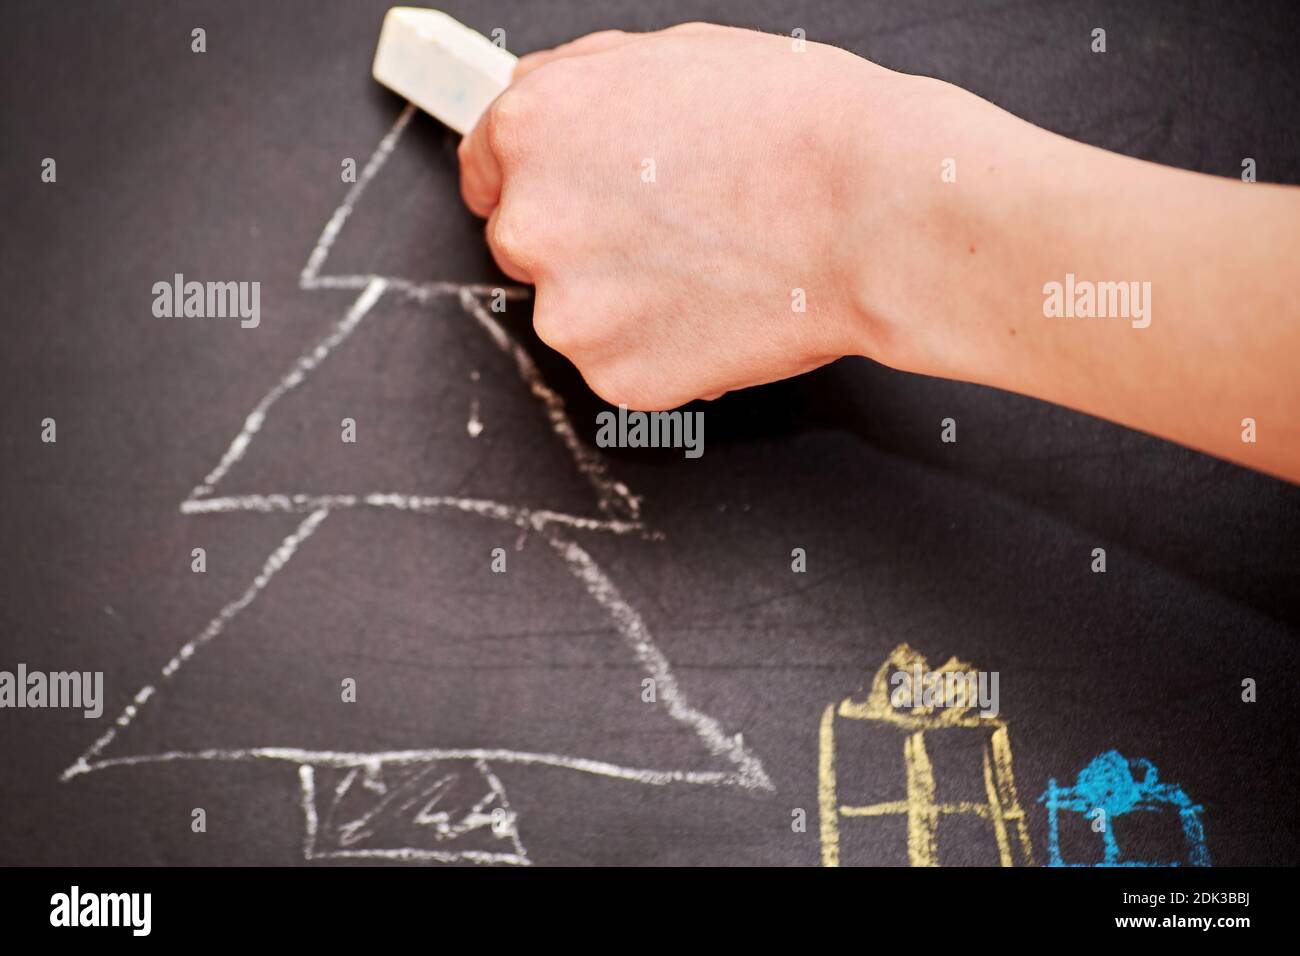 Children hand drawing a Christmas tree and presents on the chalkboard. Kids leisure activity and hobby Stock Photo